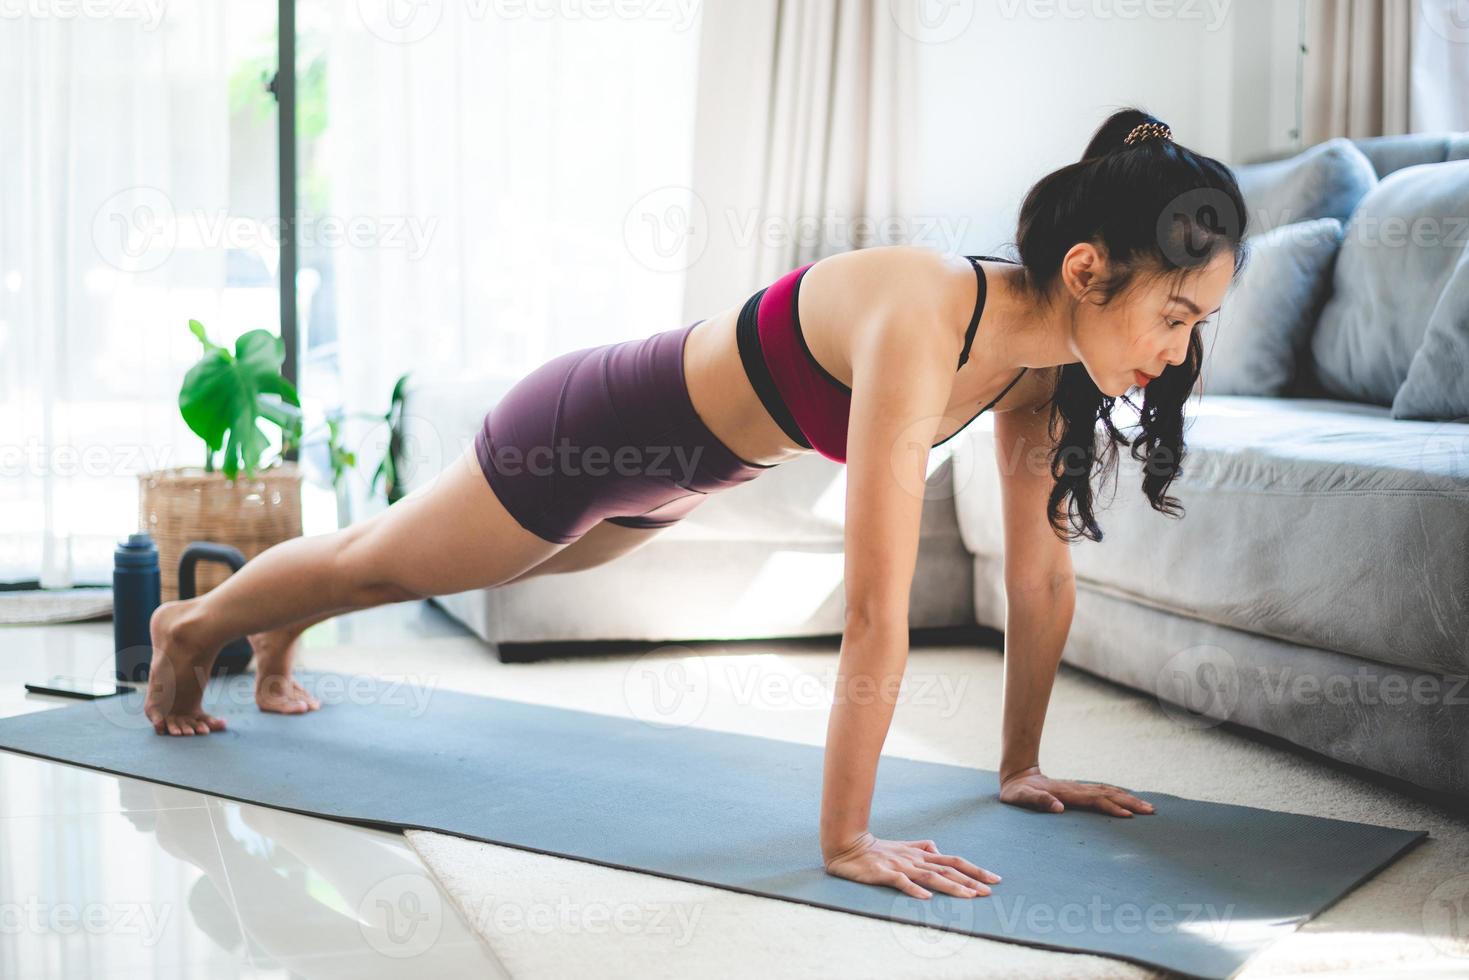 young Asian woman exercise by yoga at home gym, healthy female lifestyle with fitness sport training at home, girl doing body active physical exercise indoor house room, relaxation and wellness photo